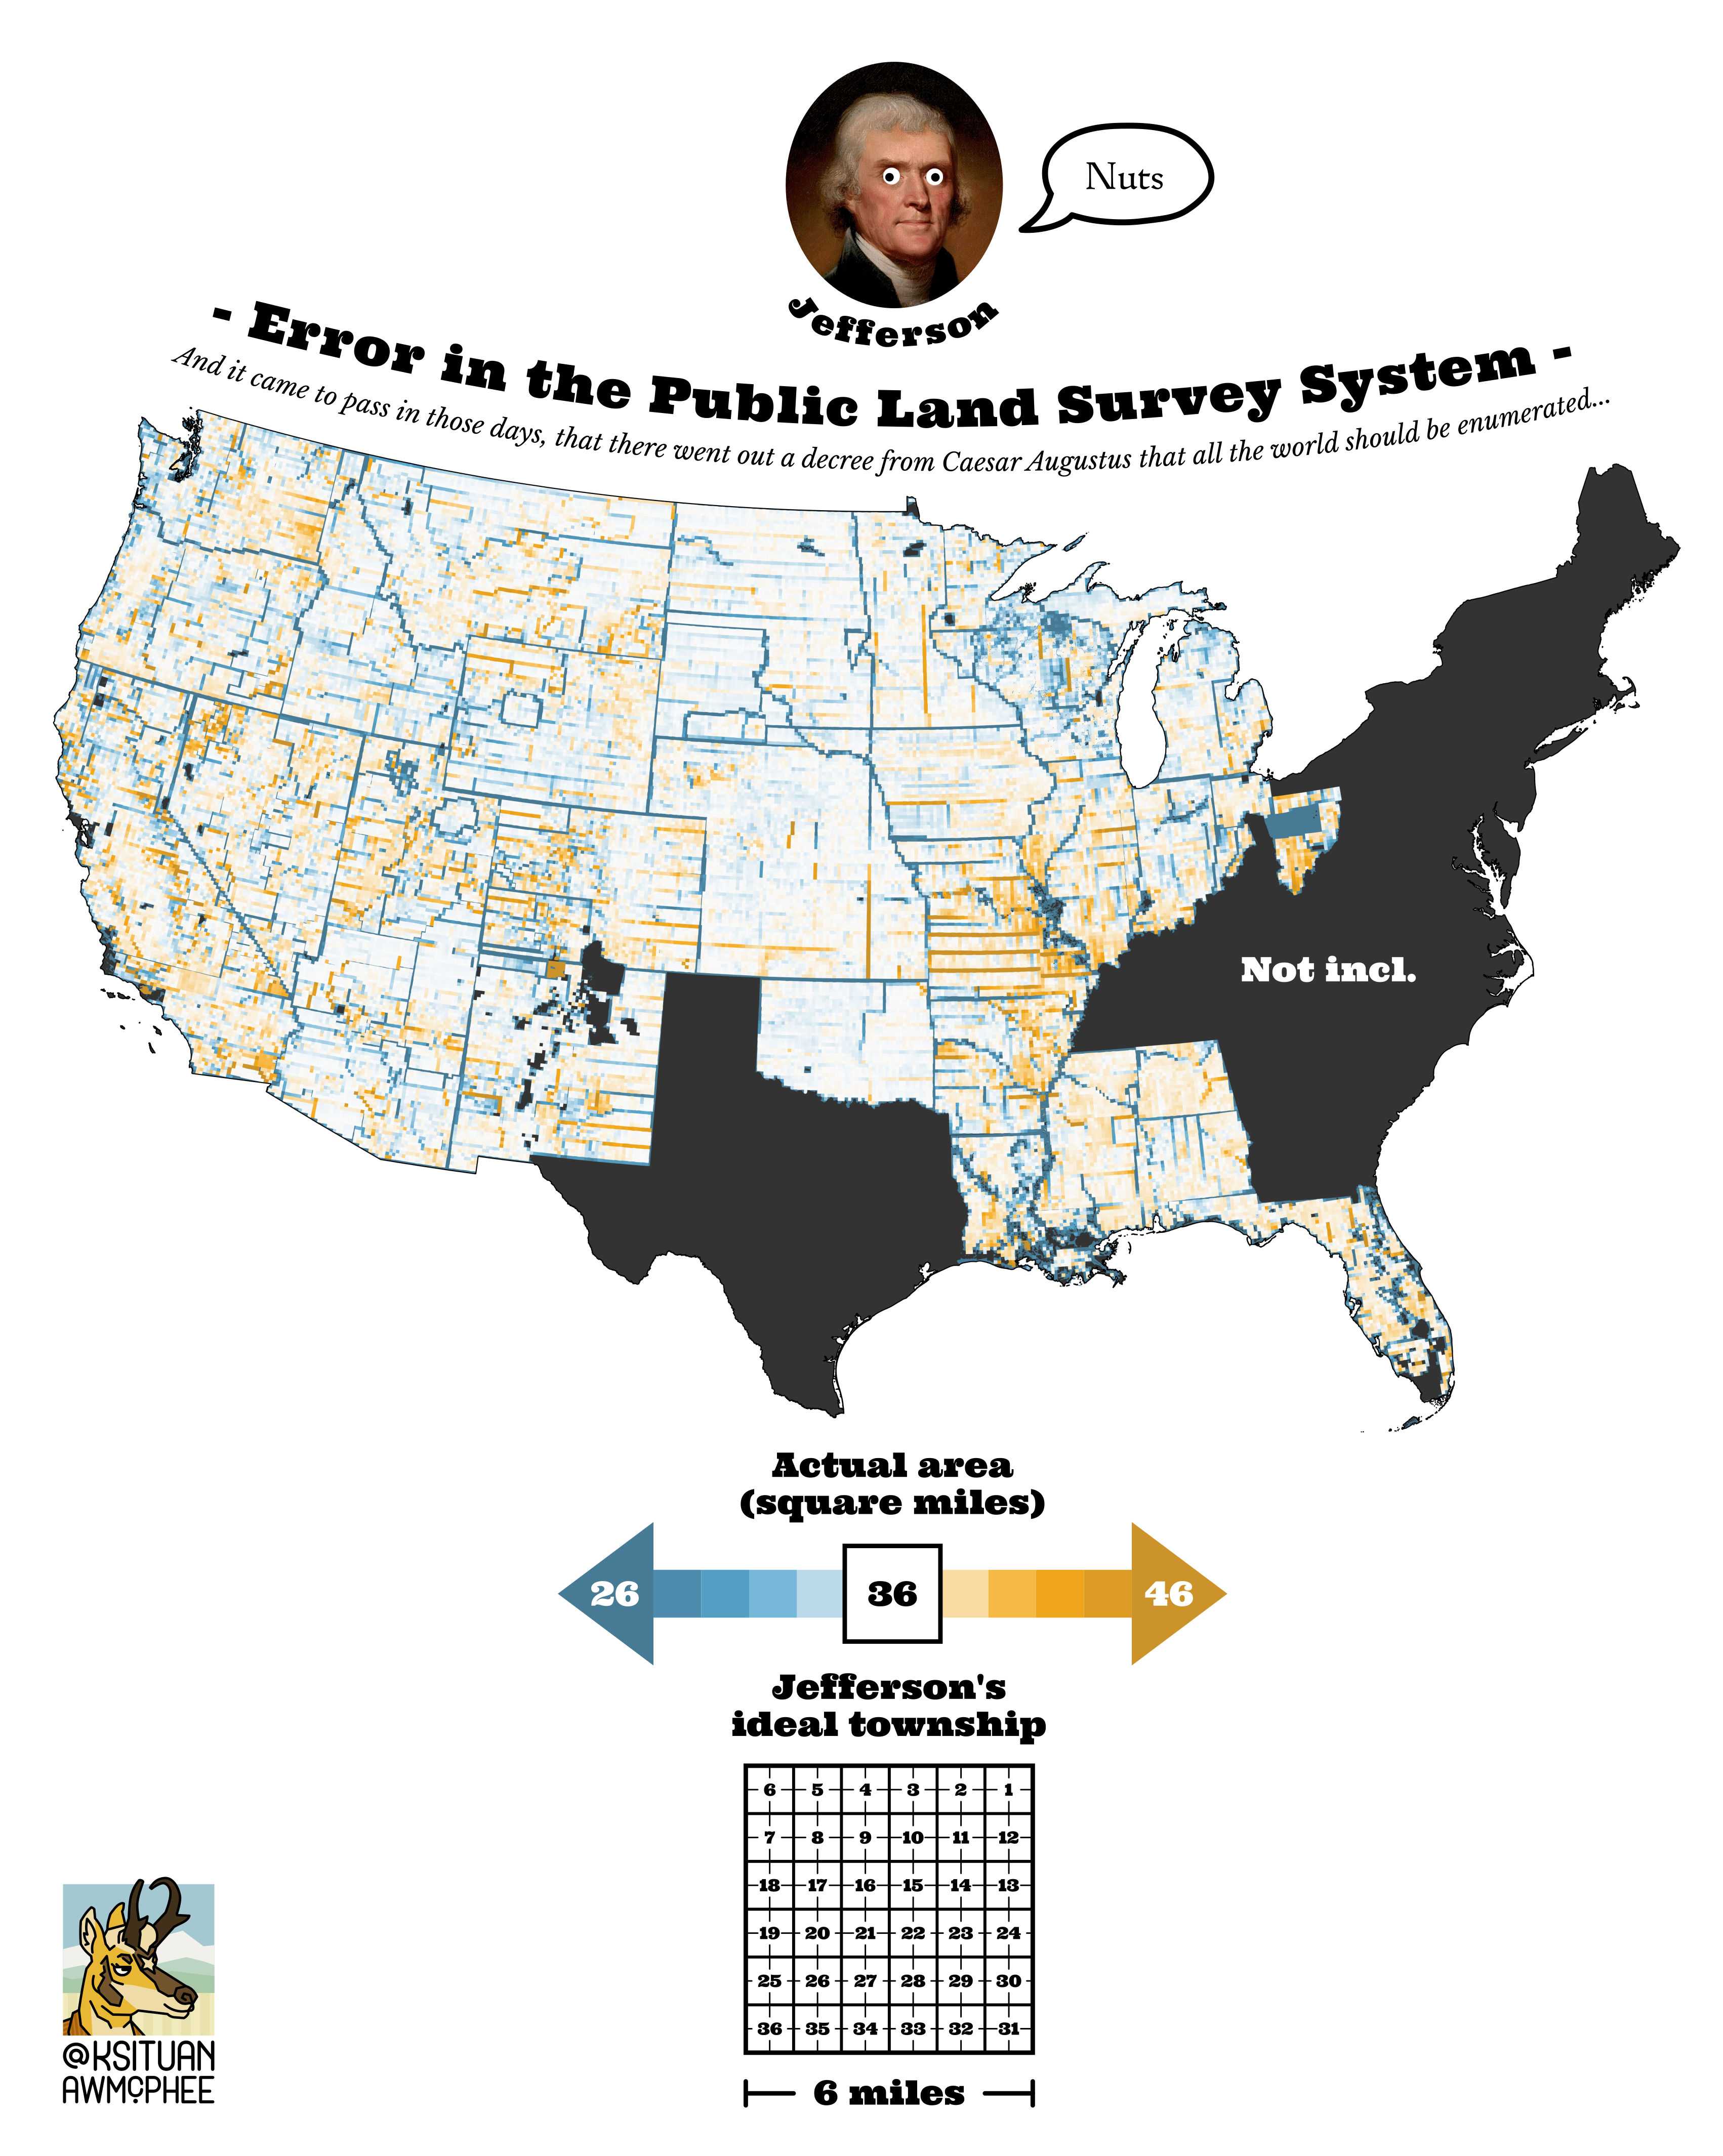 A statistical map of the measurement error in the United States Public Land Survey System.